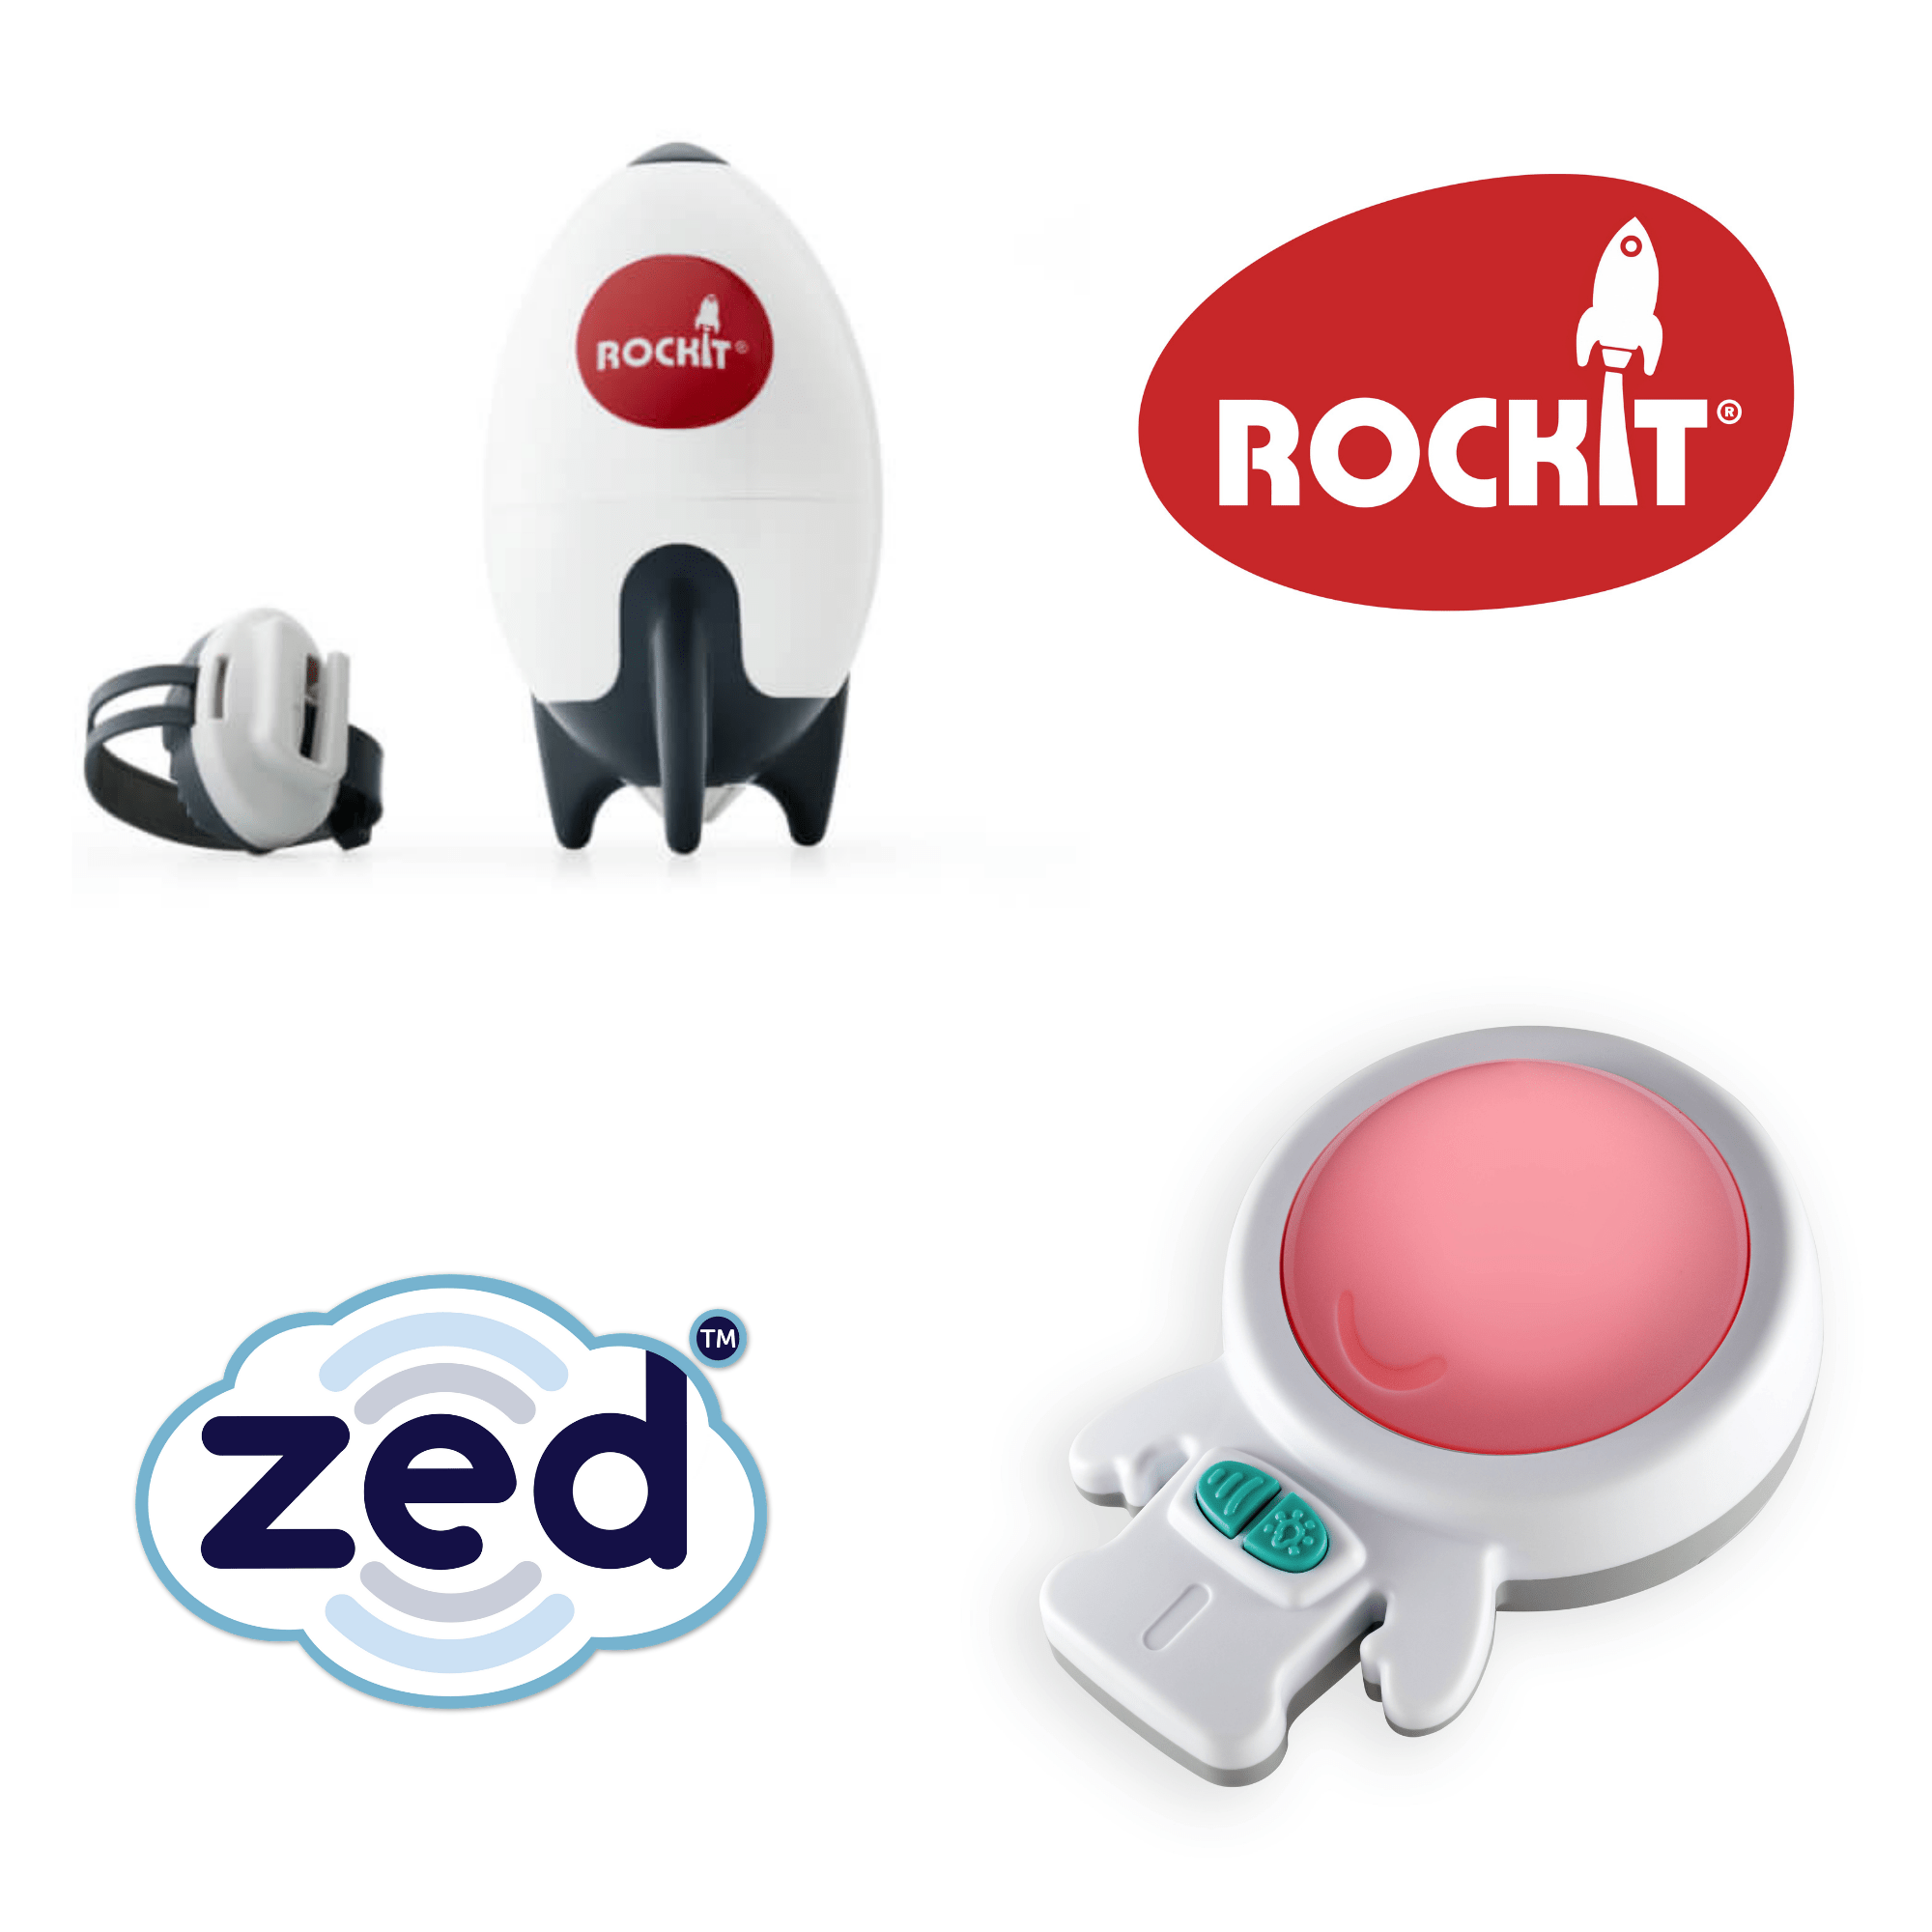 Rockit (Original AA Battery operated) & Zed Package Deal